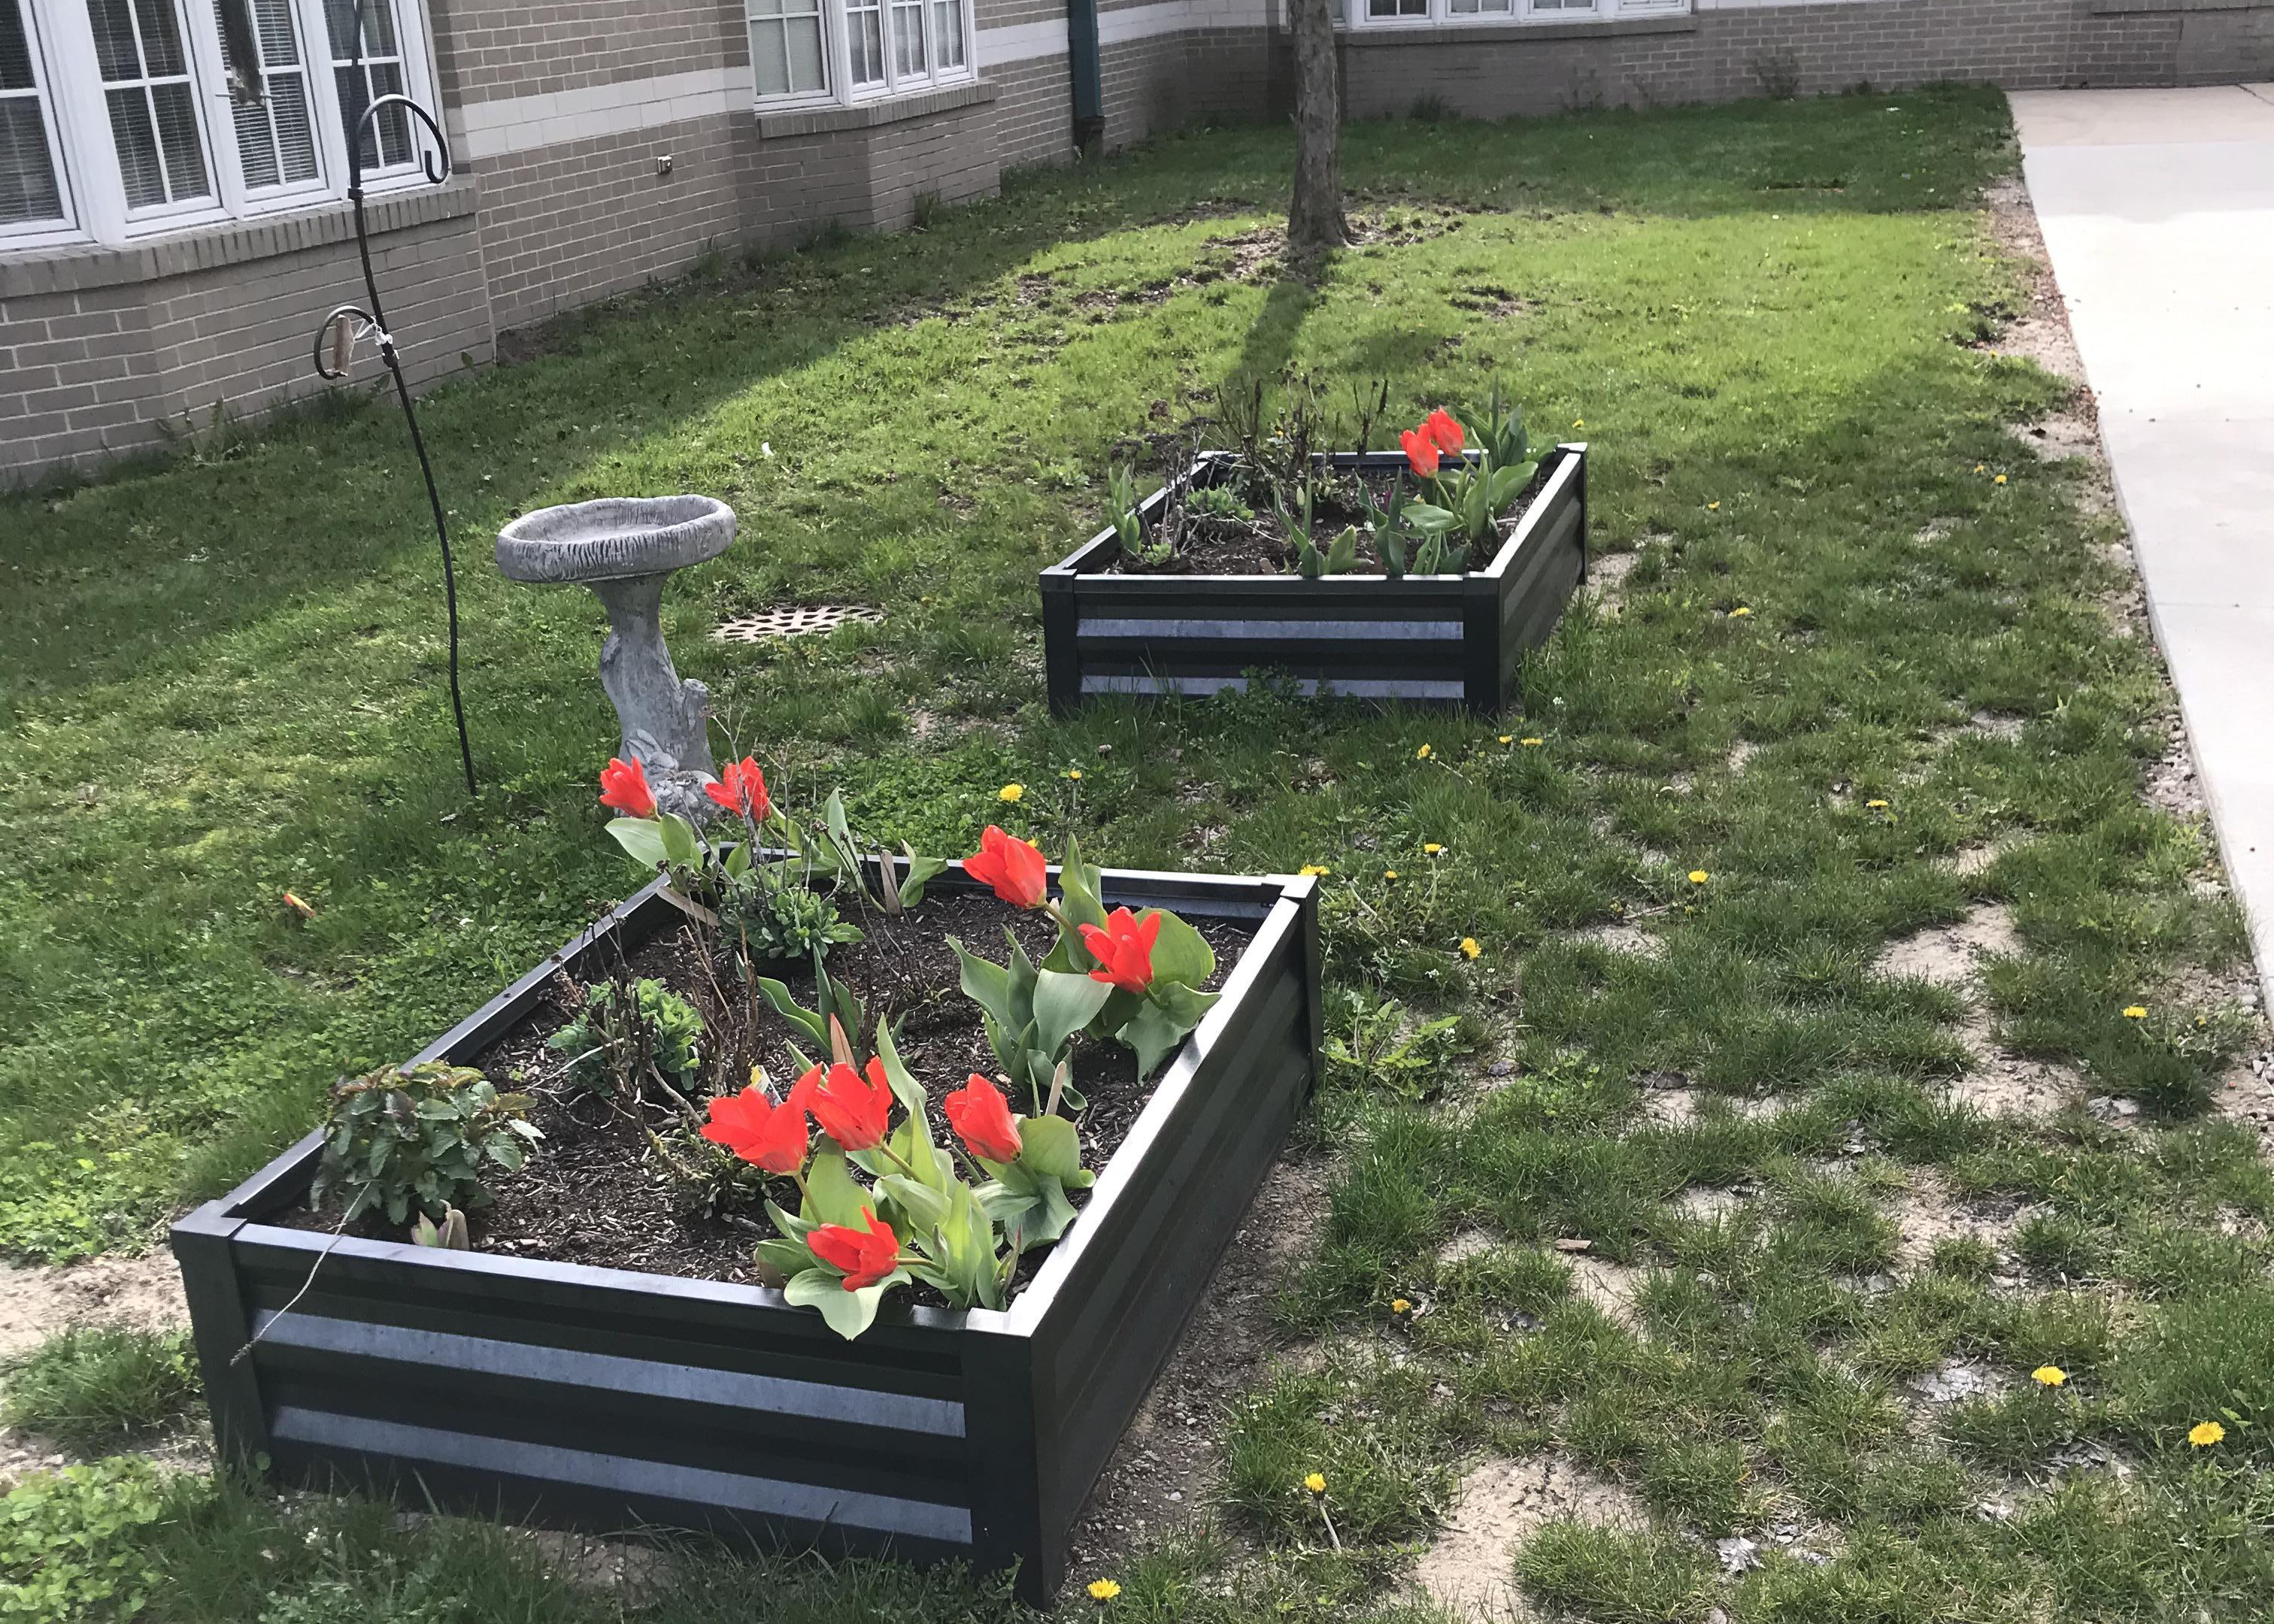 Blooming tulips at a school.